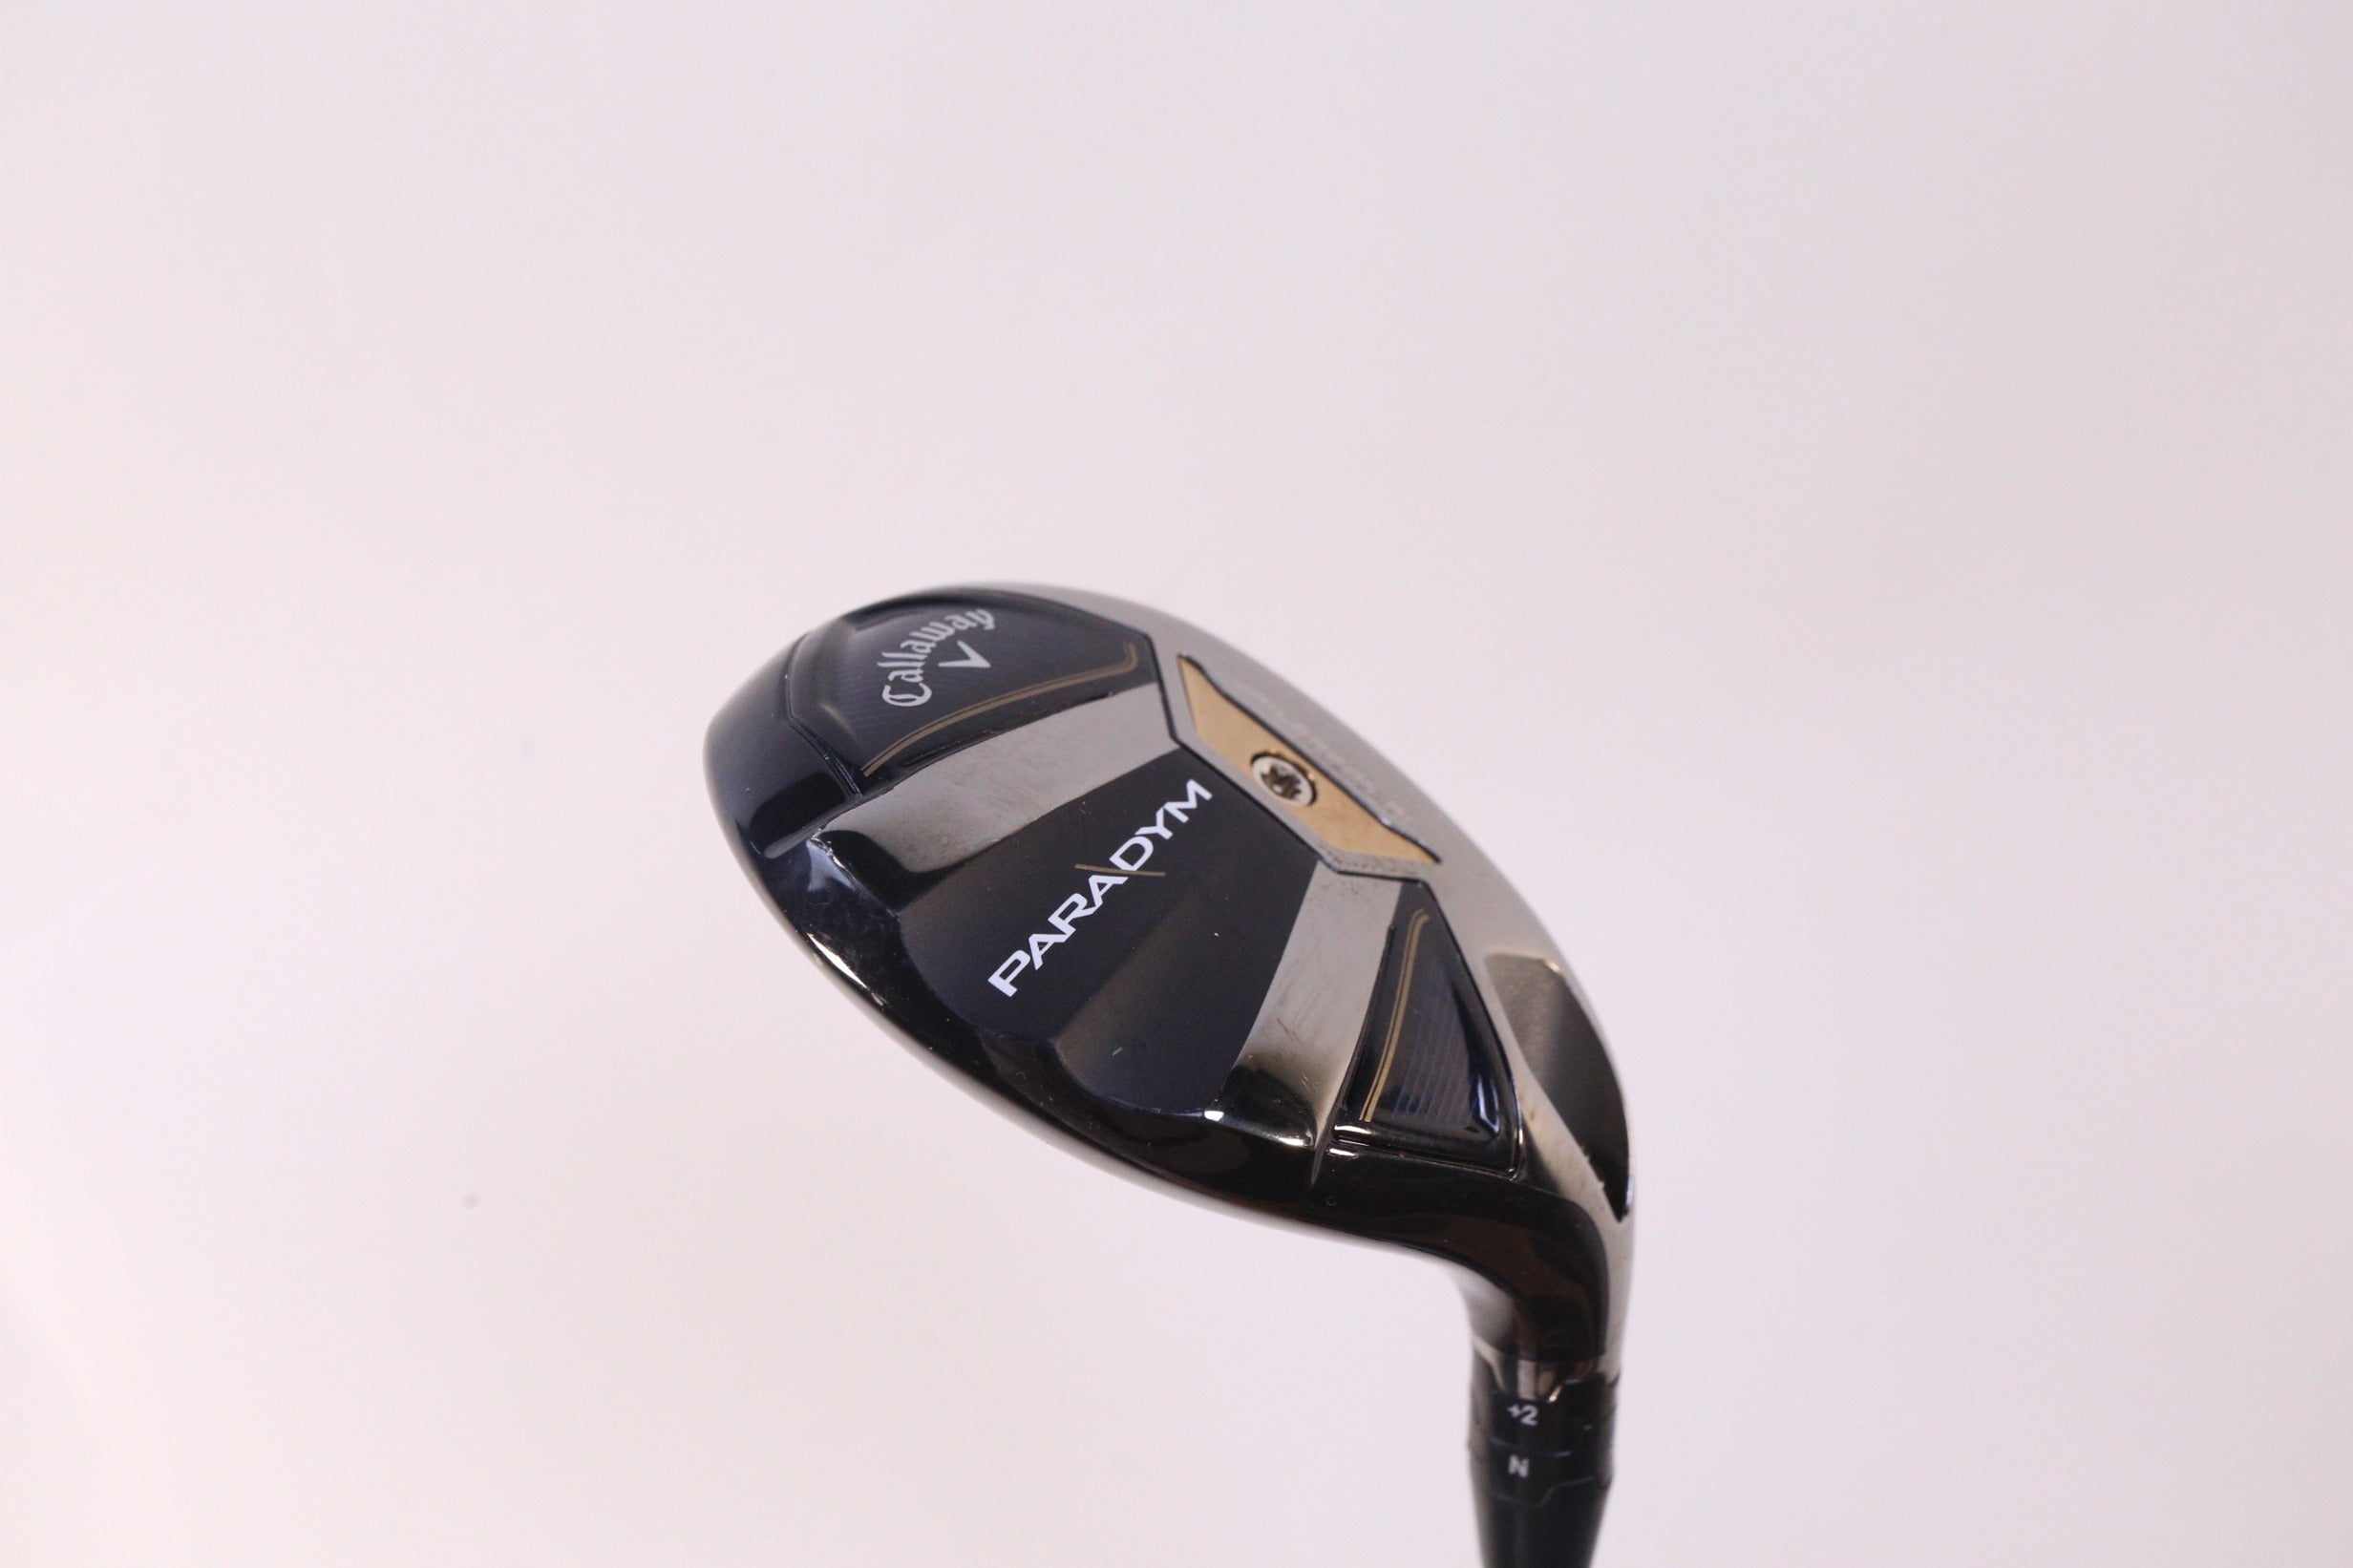 Used Callaway Paradym Right-Handed Hybrid – Next Round